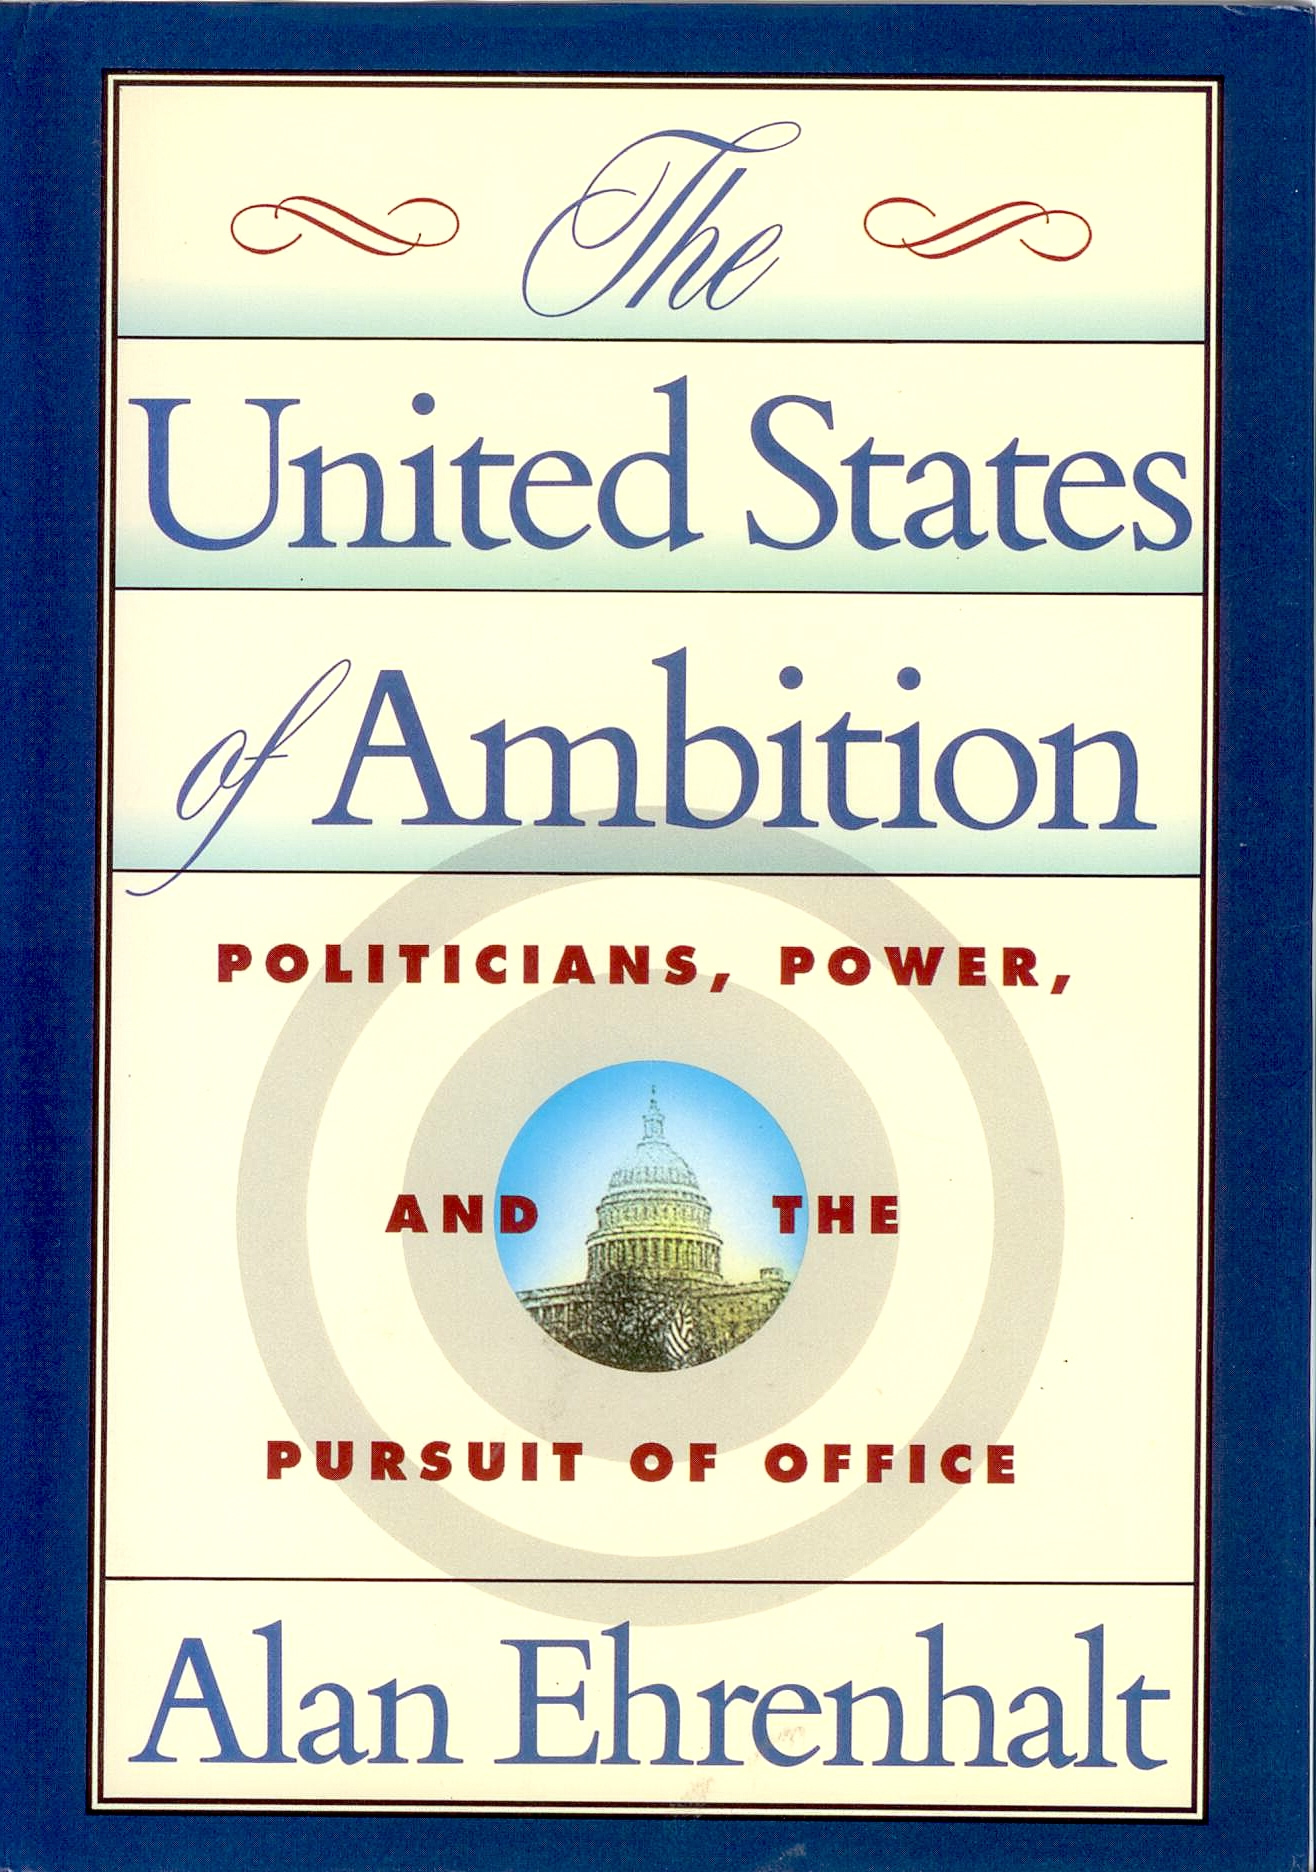 The United States of Ambition